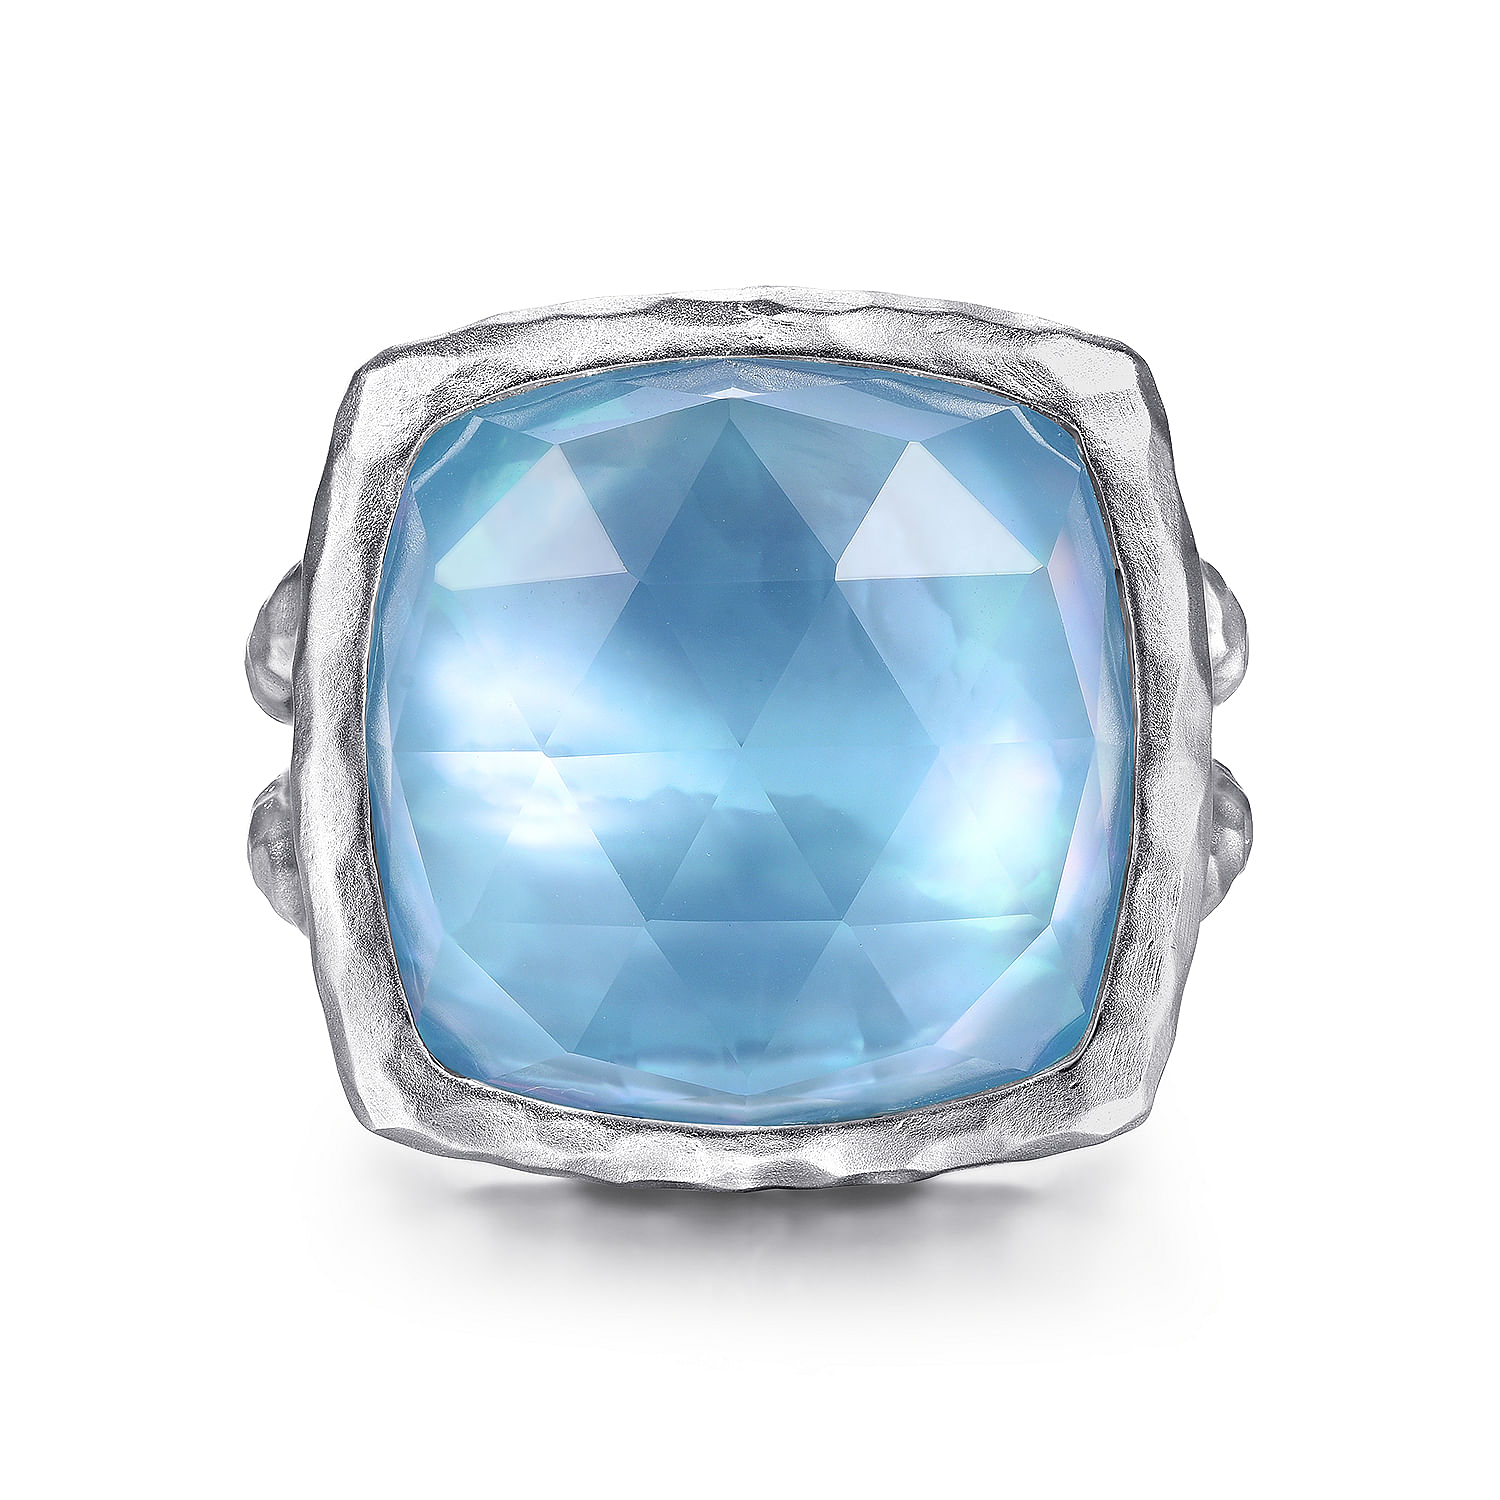 Gabriel - 925 Sterling Silver Cushion Cut Rock Crystal/White MOP/Turquoise Ring